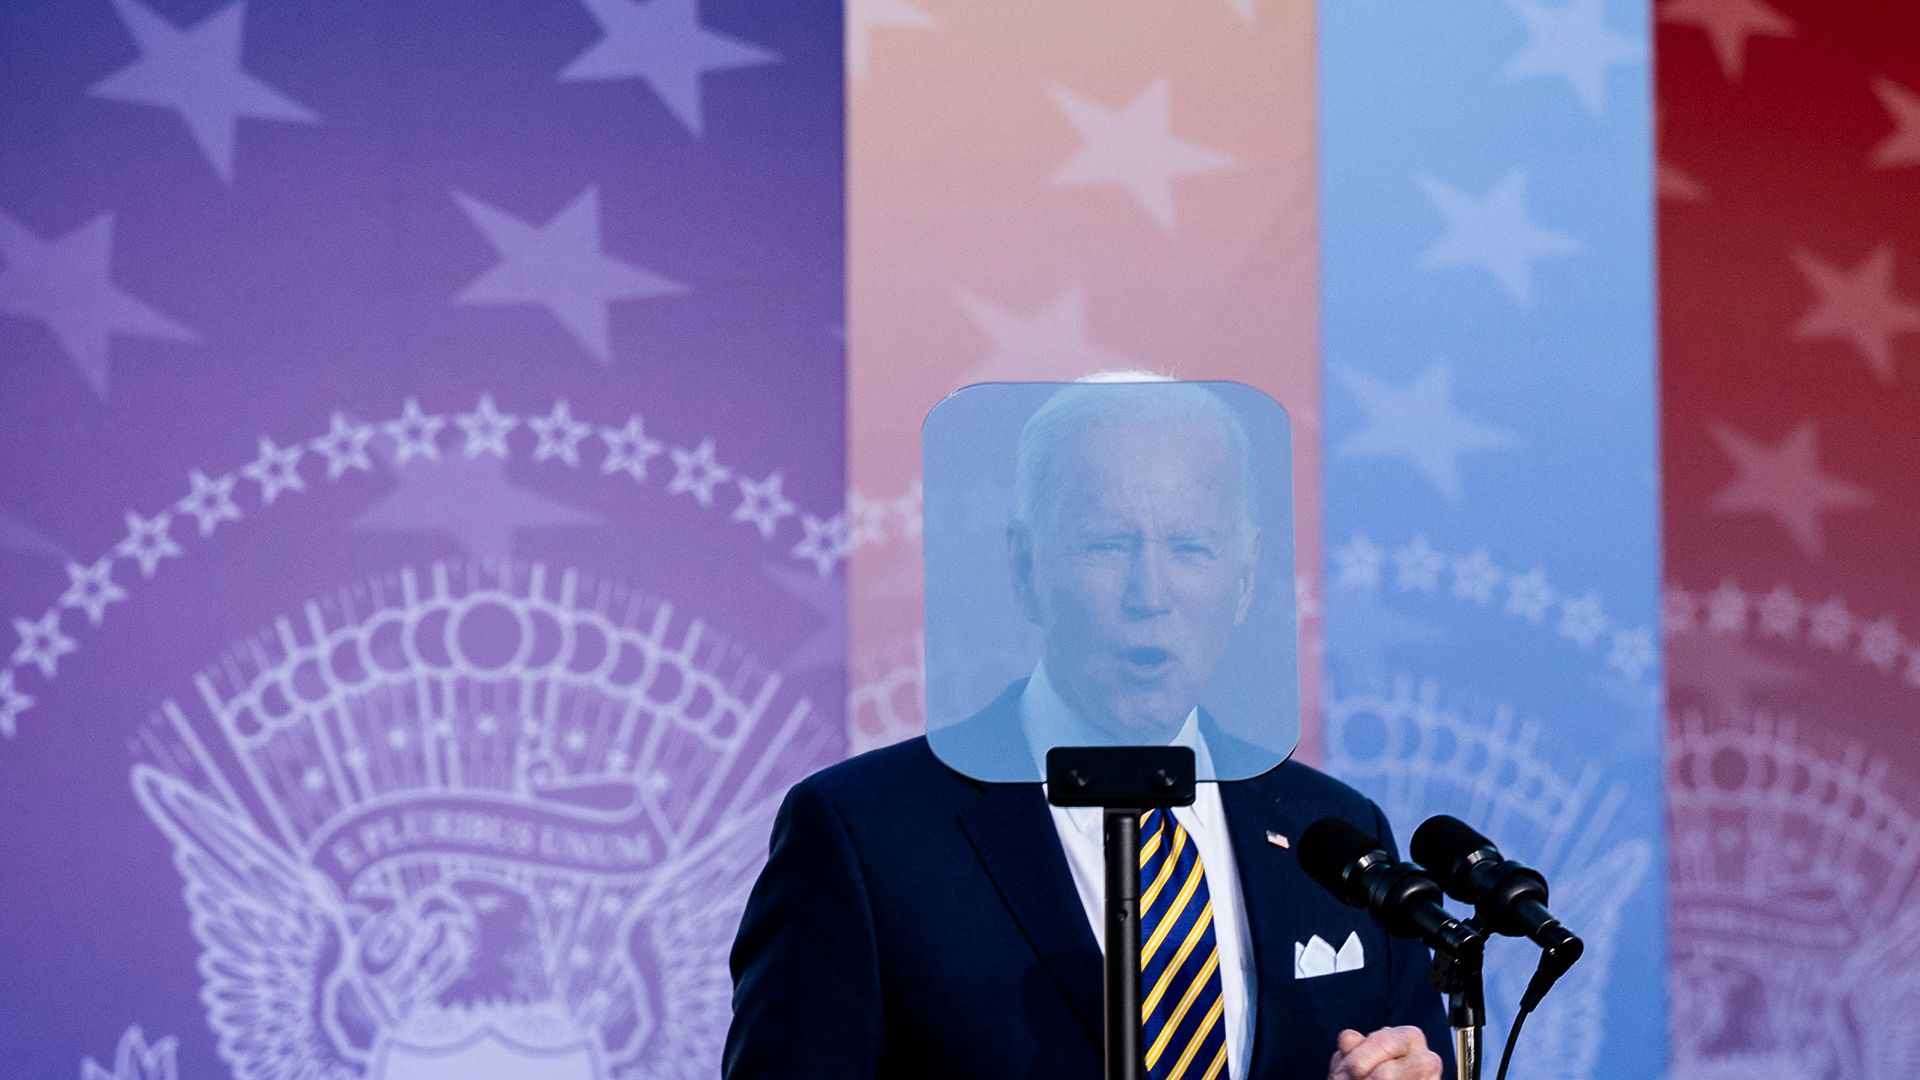 President Biden is seen through the lens of a TelePrompTer as he calls for preserving voting rights in Georgia on Tuesday.